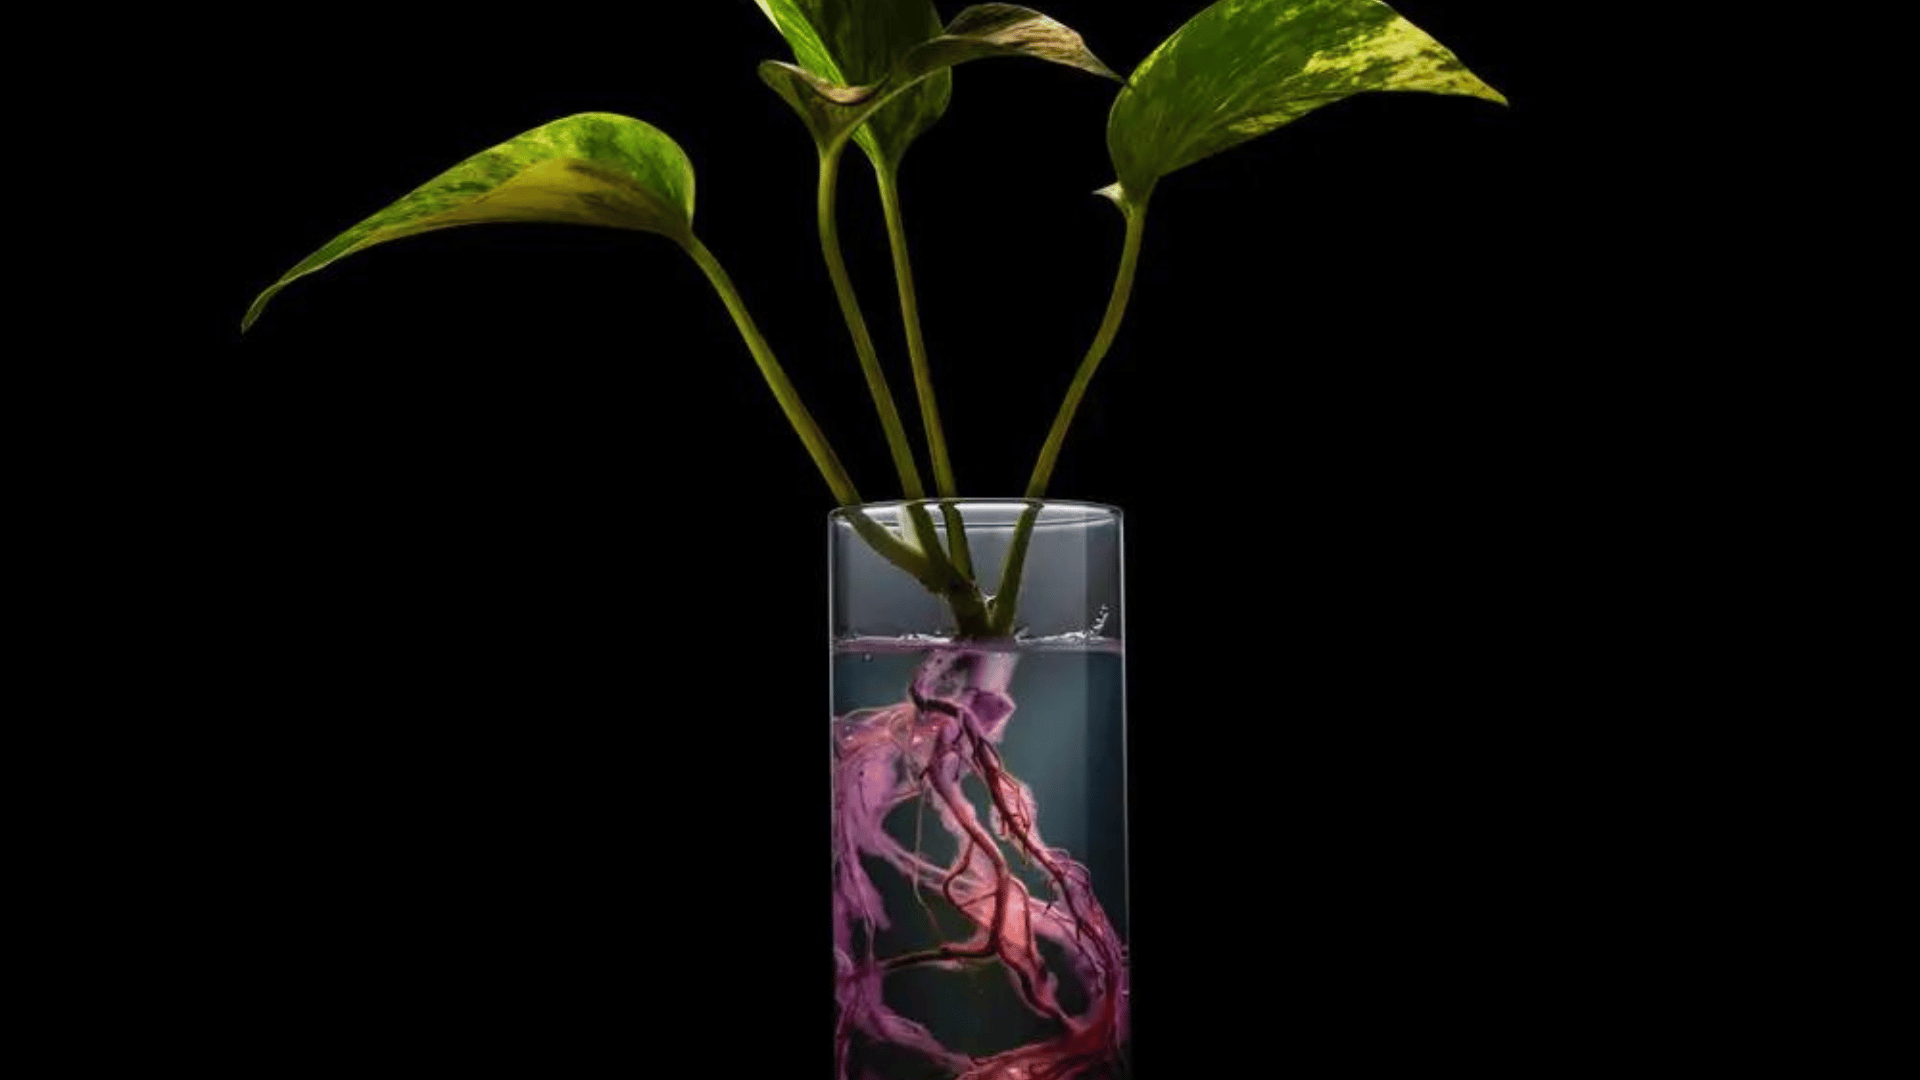 Billions of pollution-eating bacteria thrive around the roots of Neo Px, the first houseplant bioengineered to reduce indoor air pollution. Neoplants